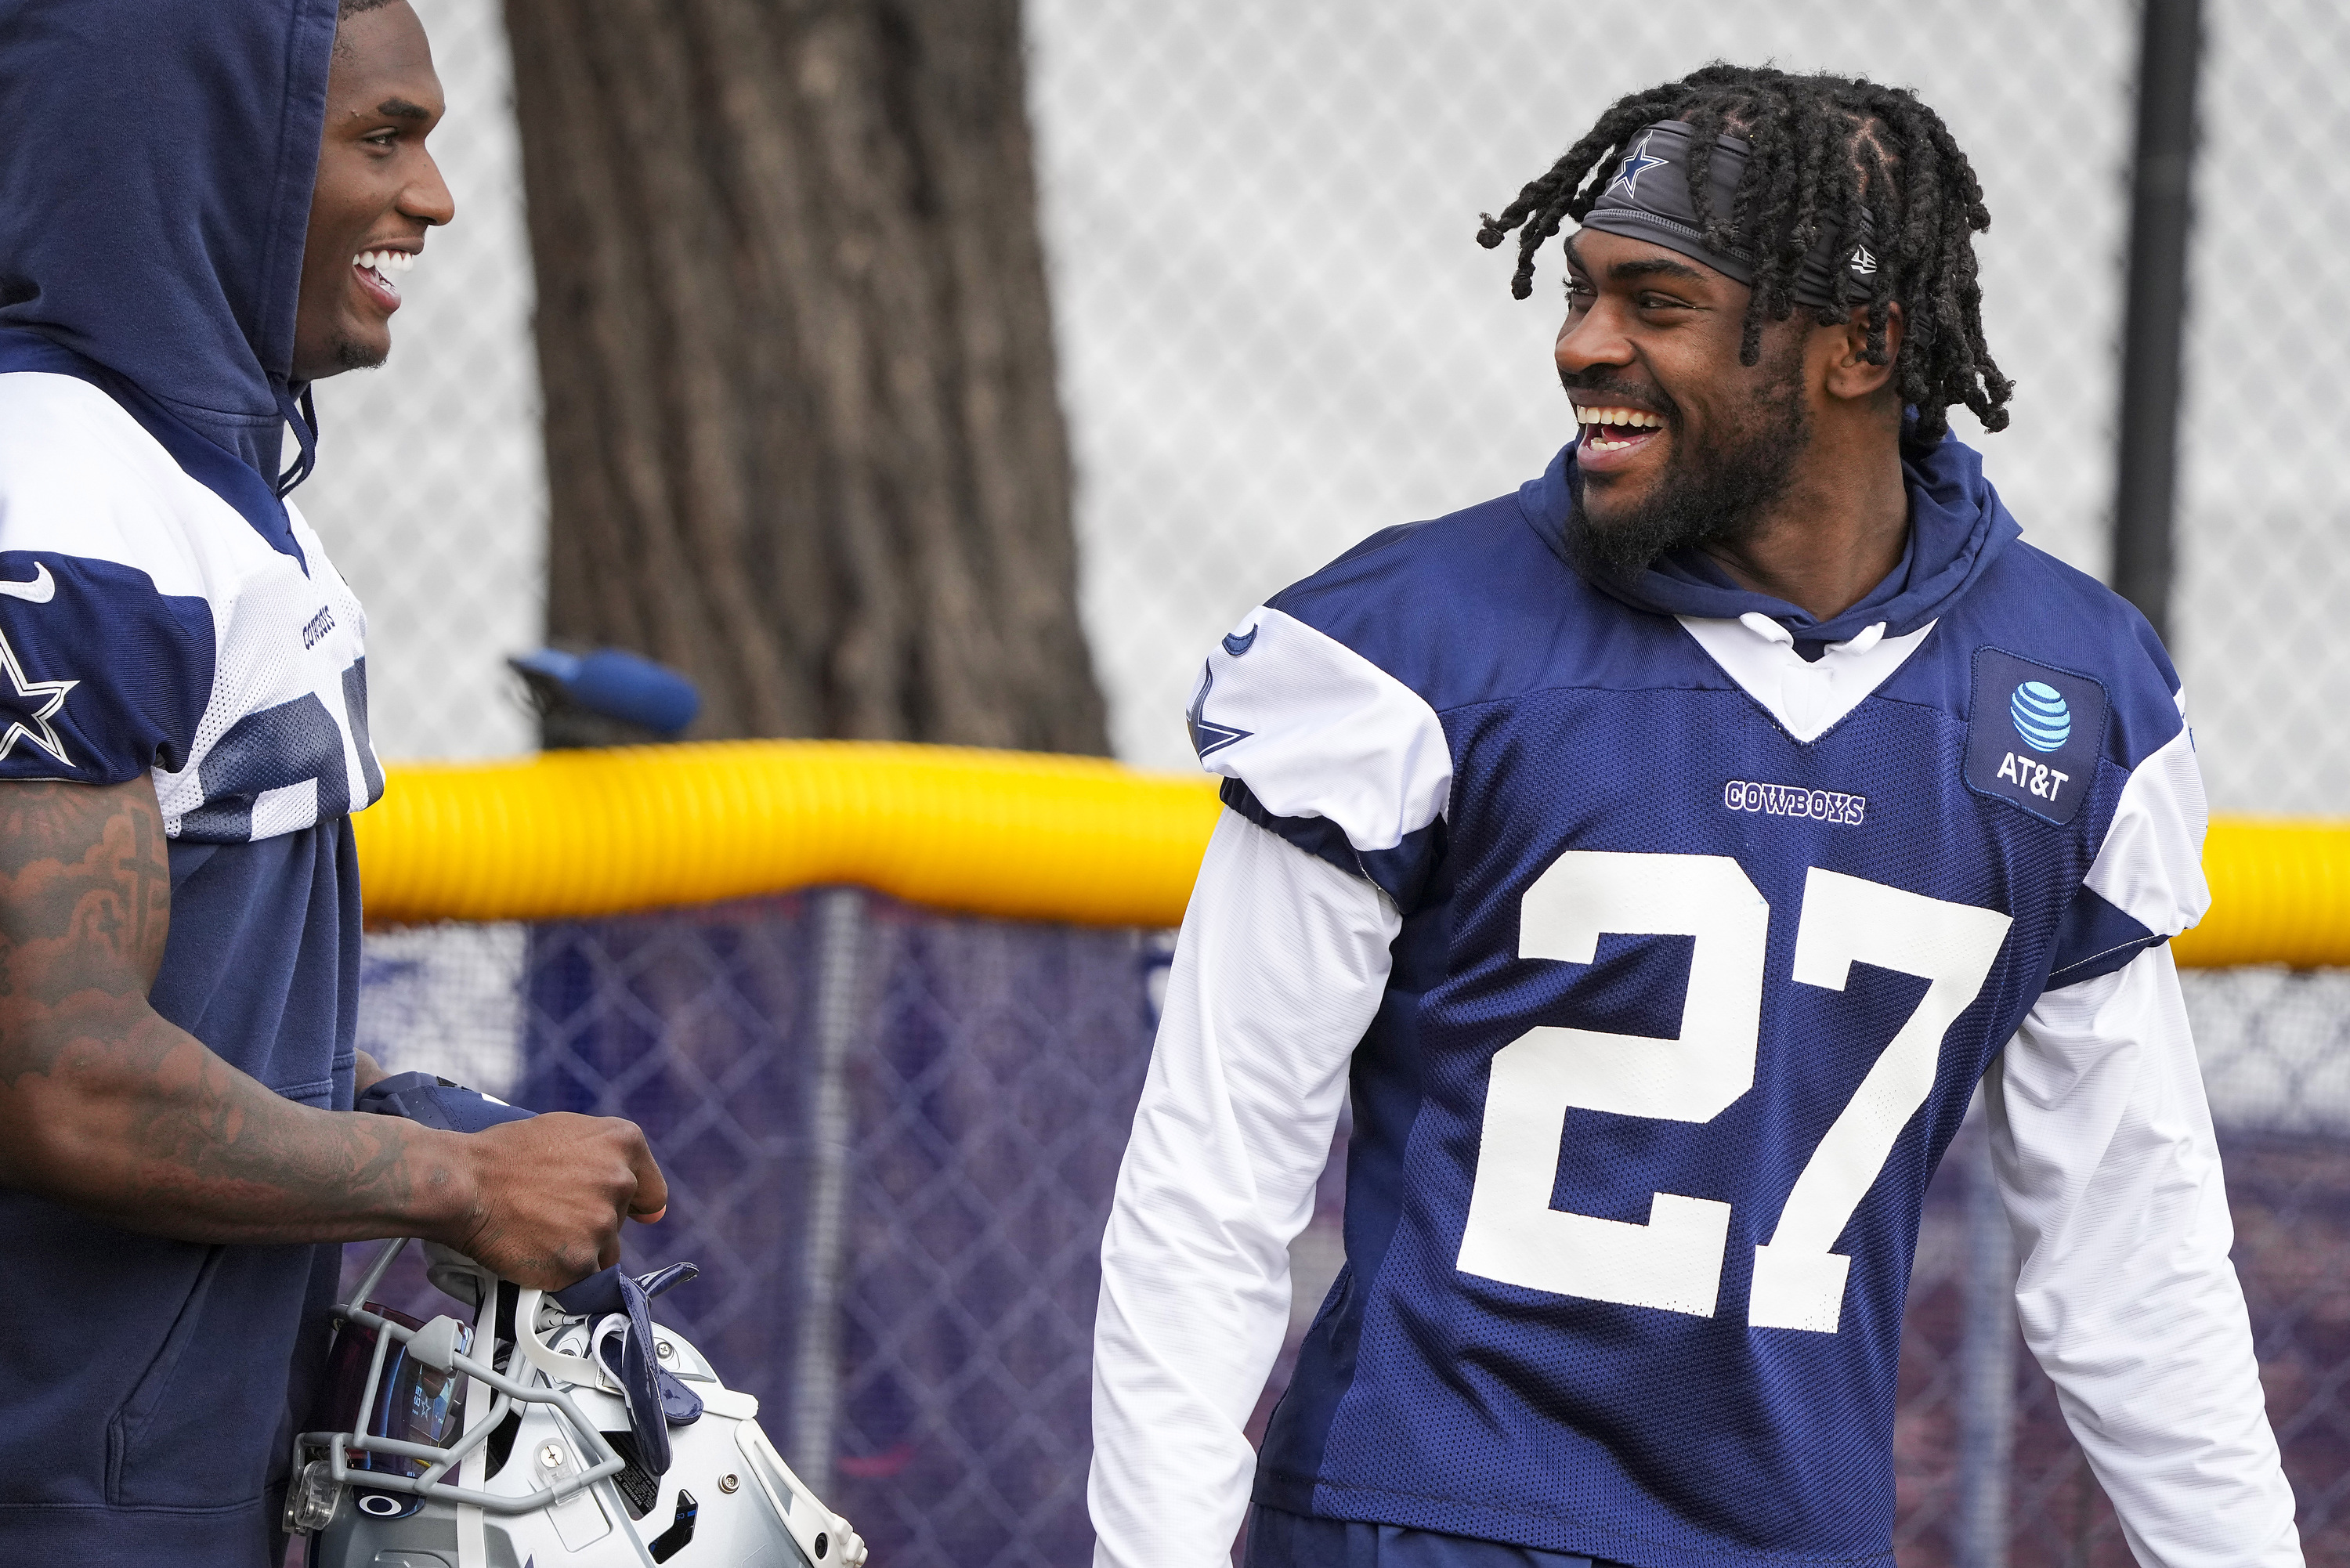 CeeDee Lamb and Trevon Diggs came to Dallas together. Now, they're setting  the tone of Cowboys camp.